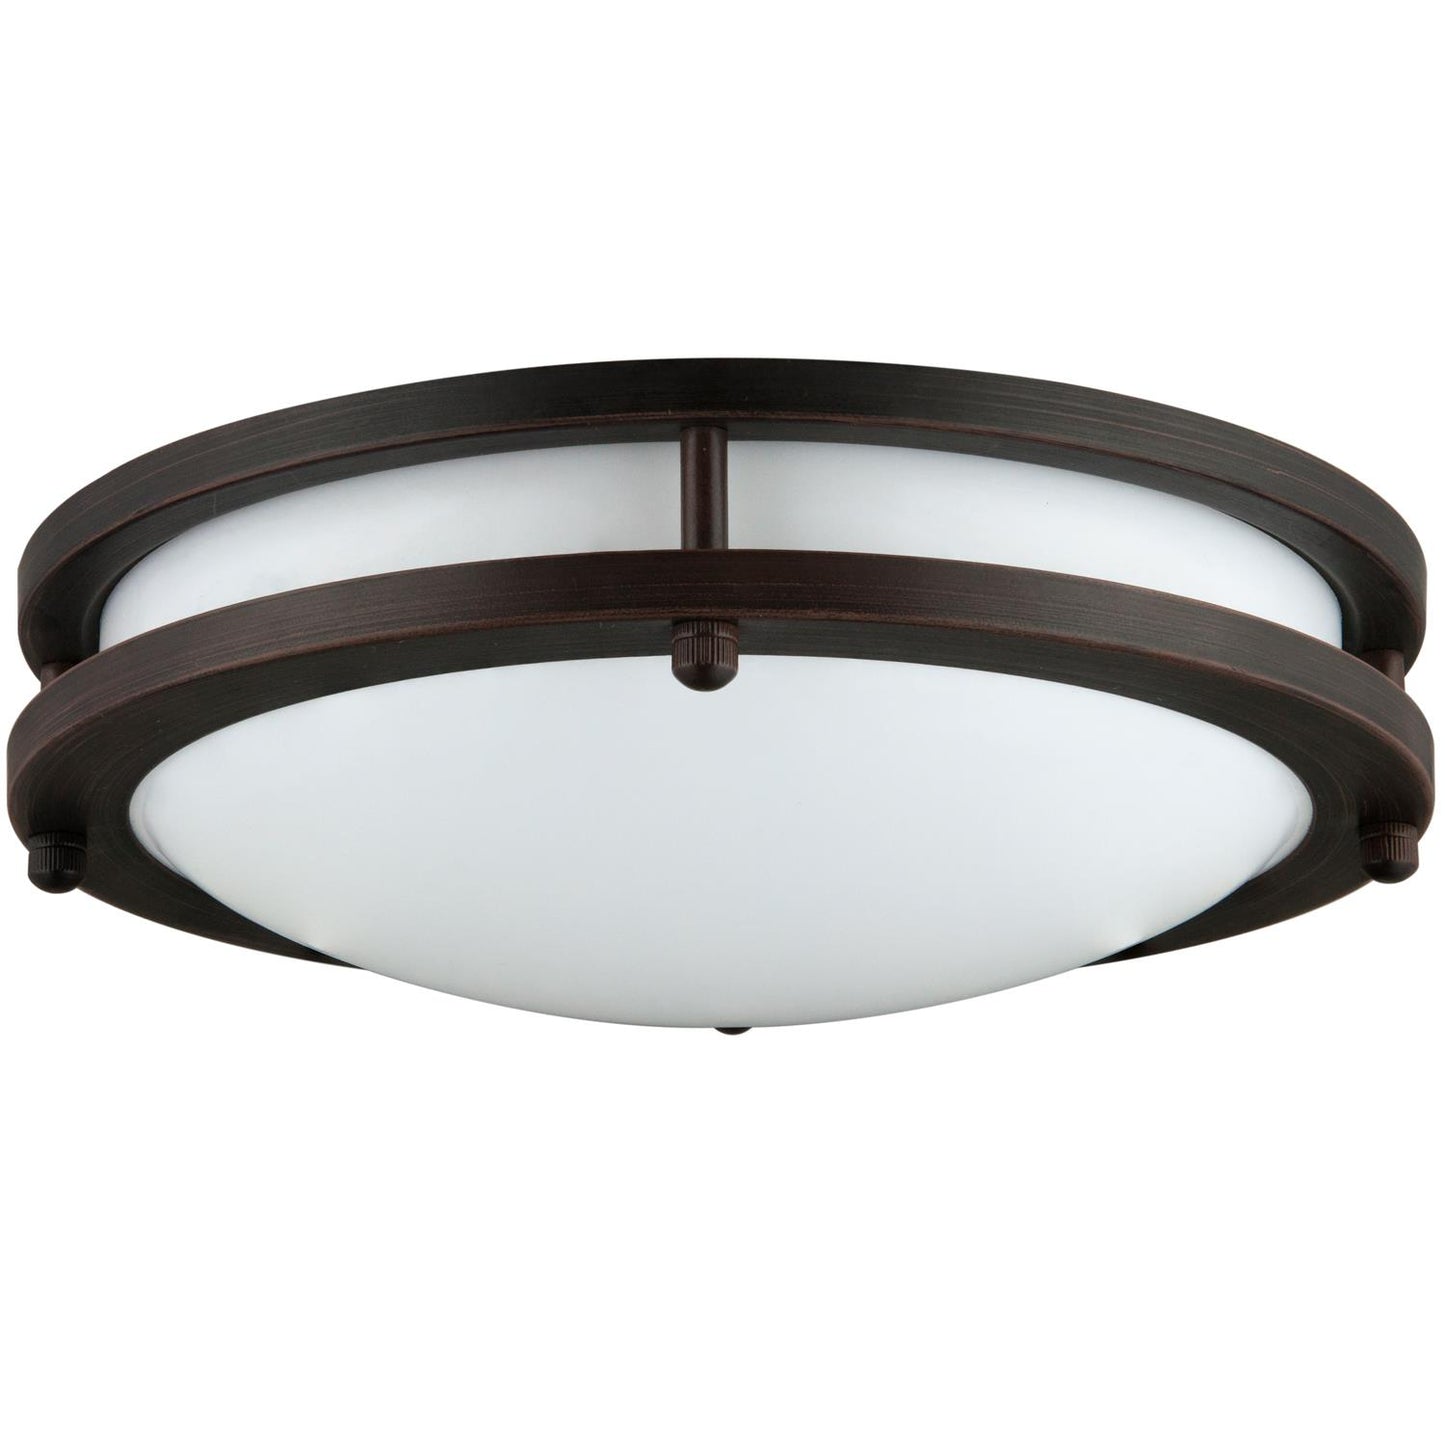 Sunlite 12" Round LED Double Band Fixture, 4000K - Cool White, Oil Rubbed Bronze Finish